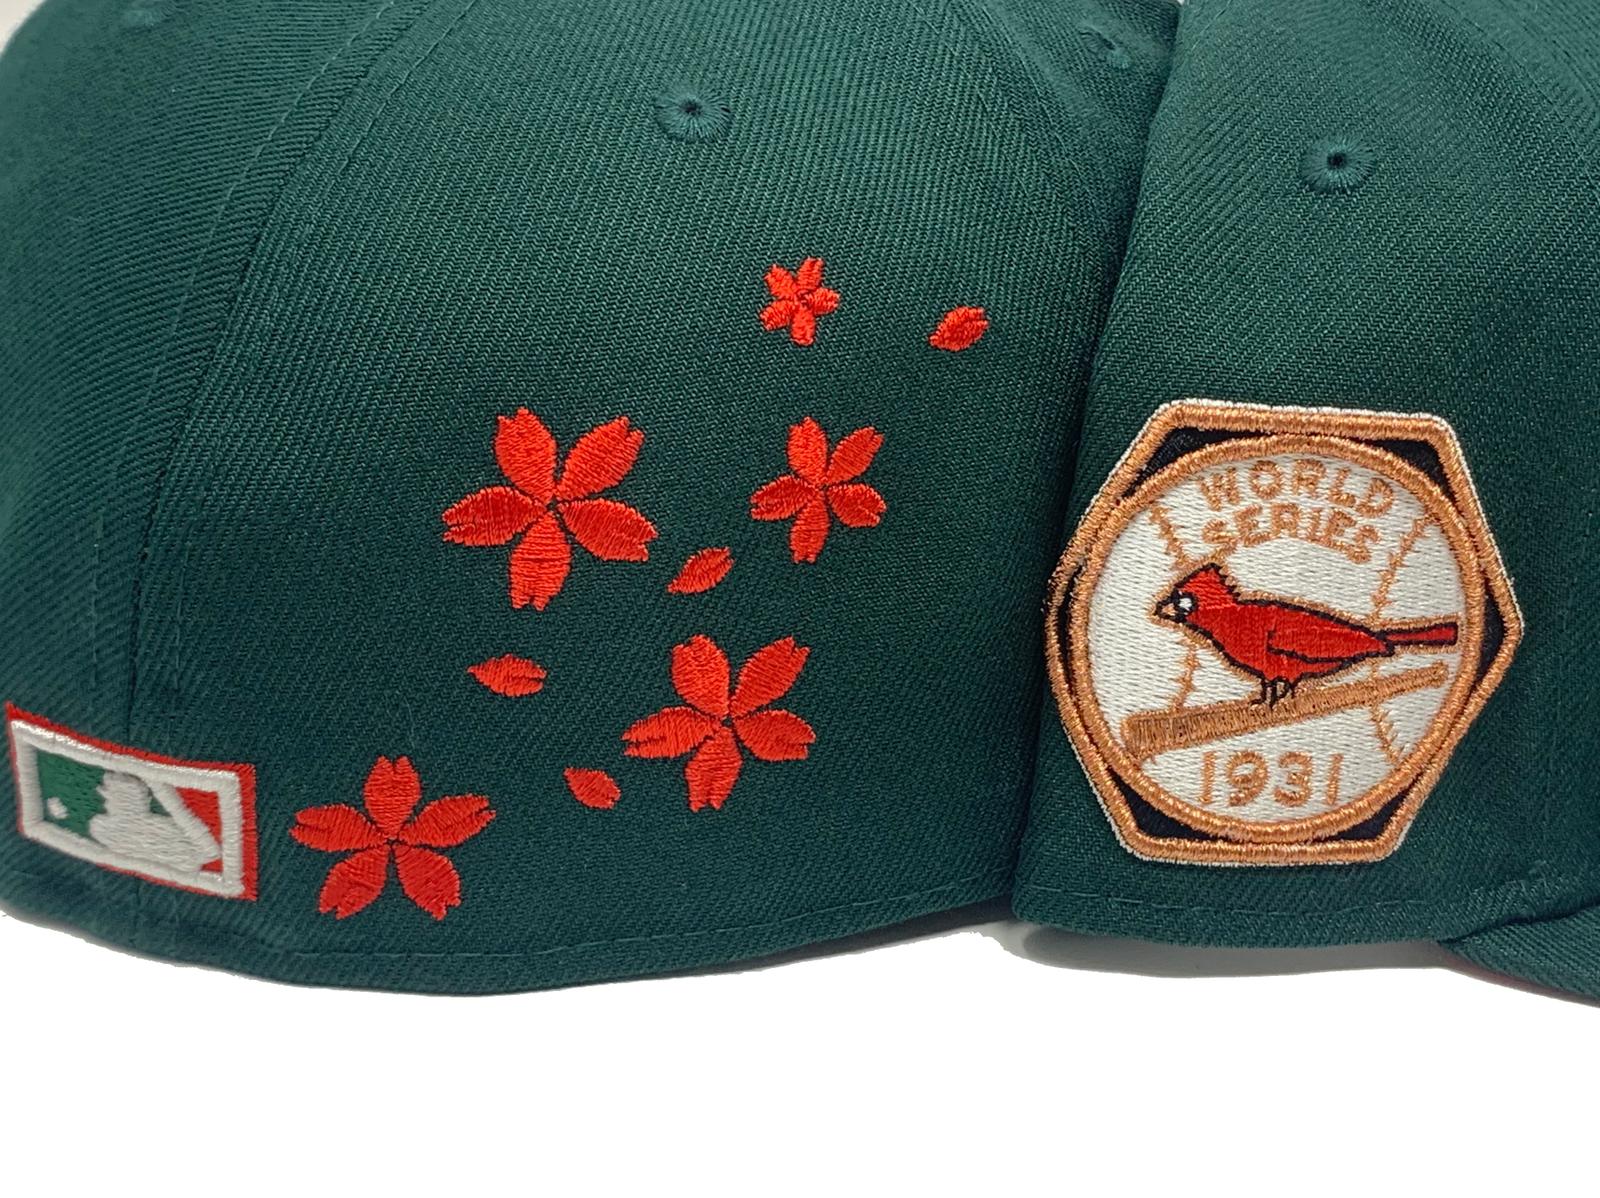 Exclusive Fitted New Era 7 3/4 St Louis Cardinals Cap Hat Mint Red Teal  '57 ASG